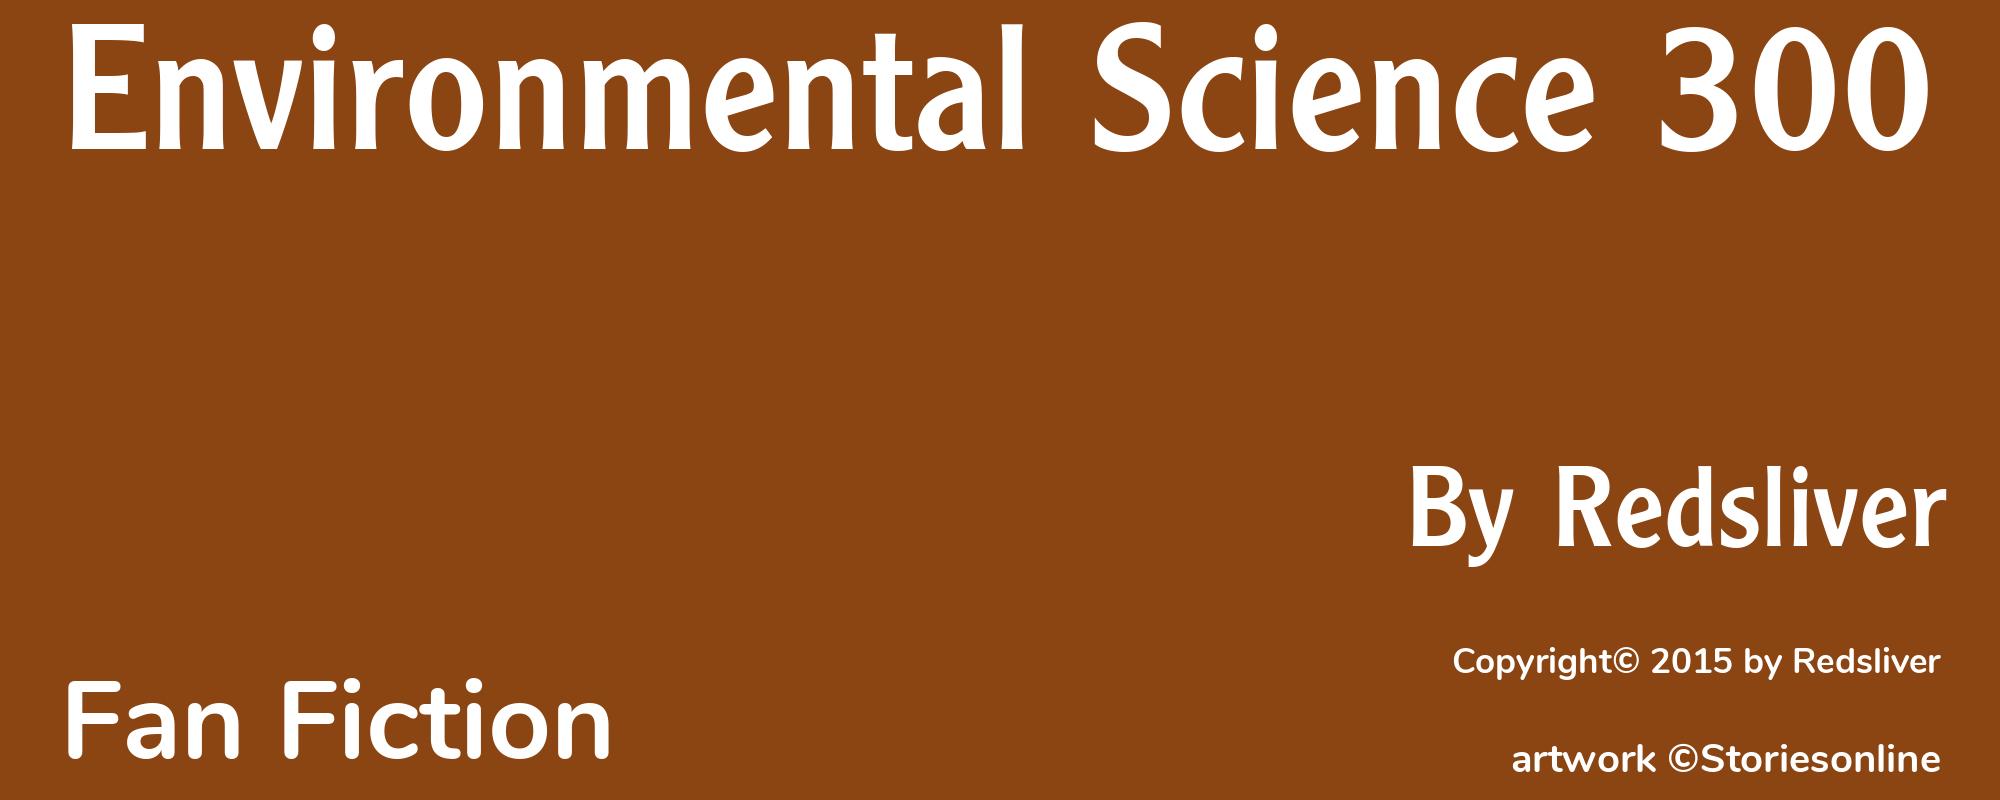 Environmental Science 300 - Cover